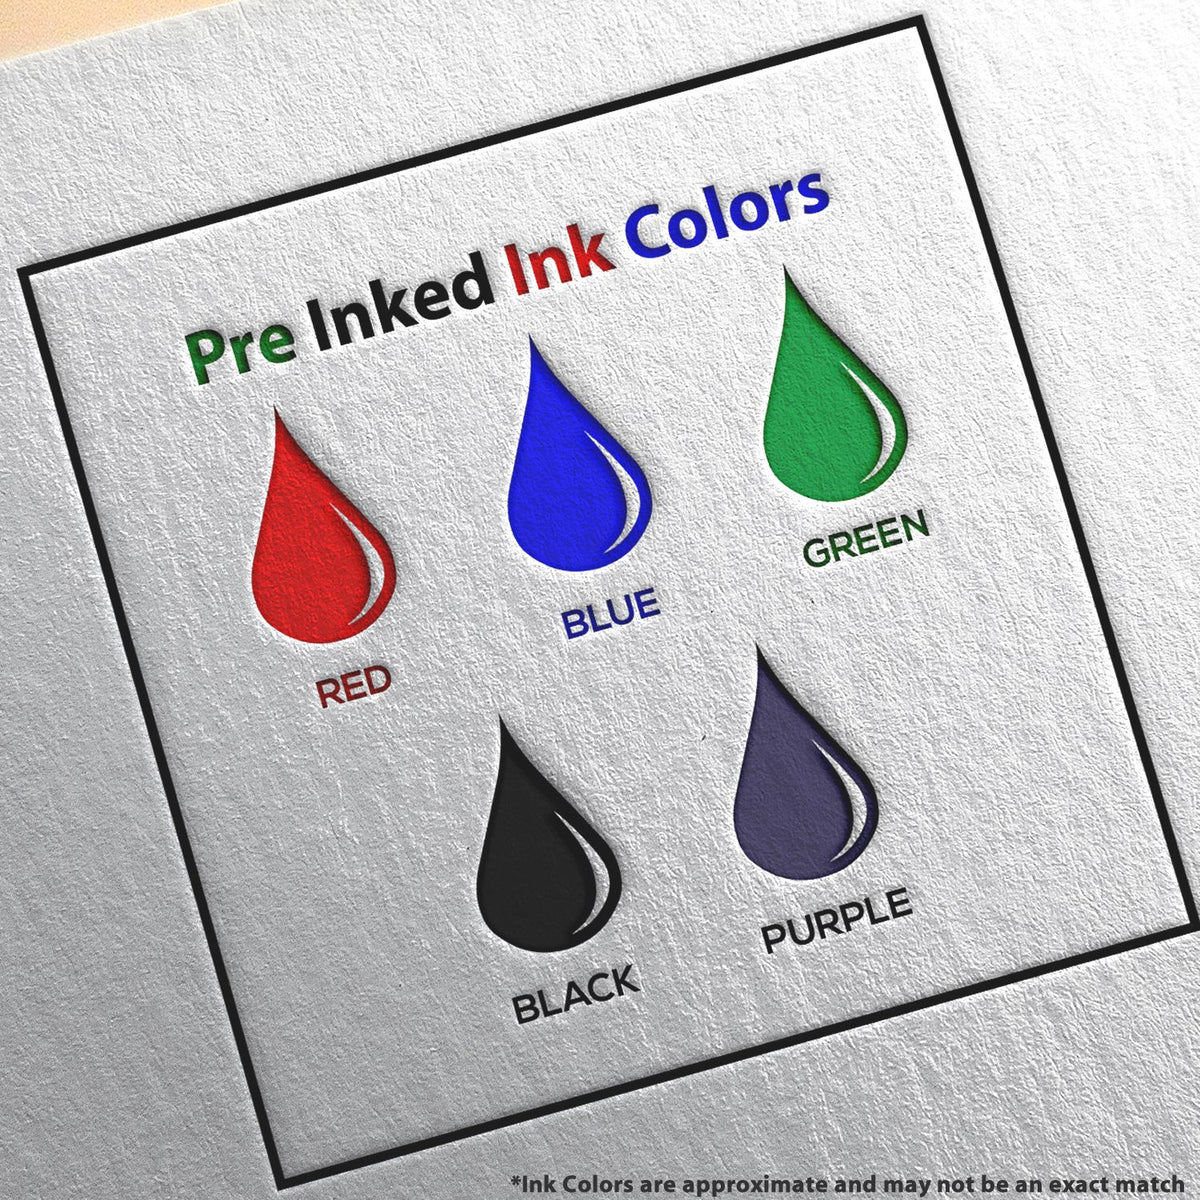 A picture showing the different ink colors or hues available for the Slim Pre-Inked Kansas Professional Engineer Seal Stamp product.